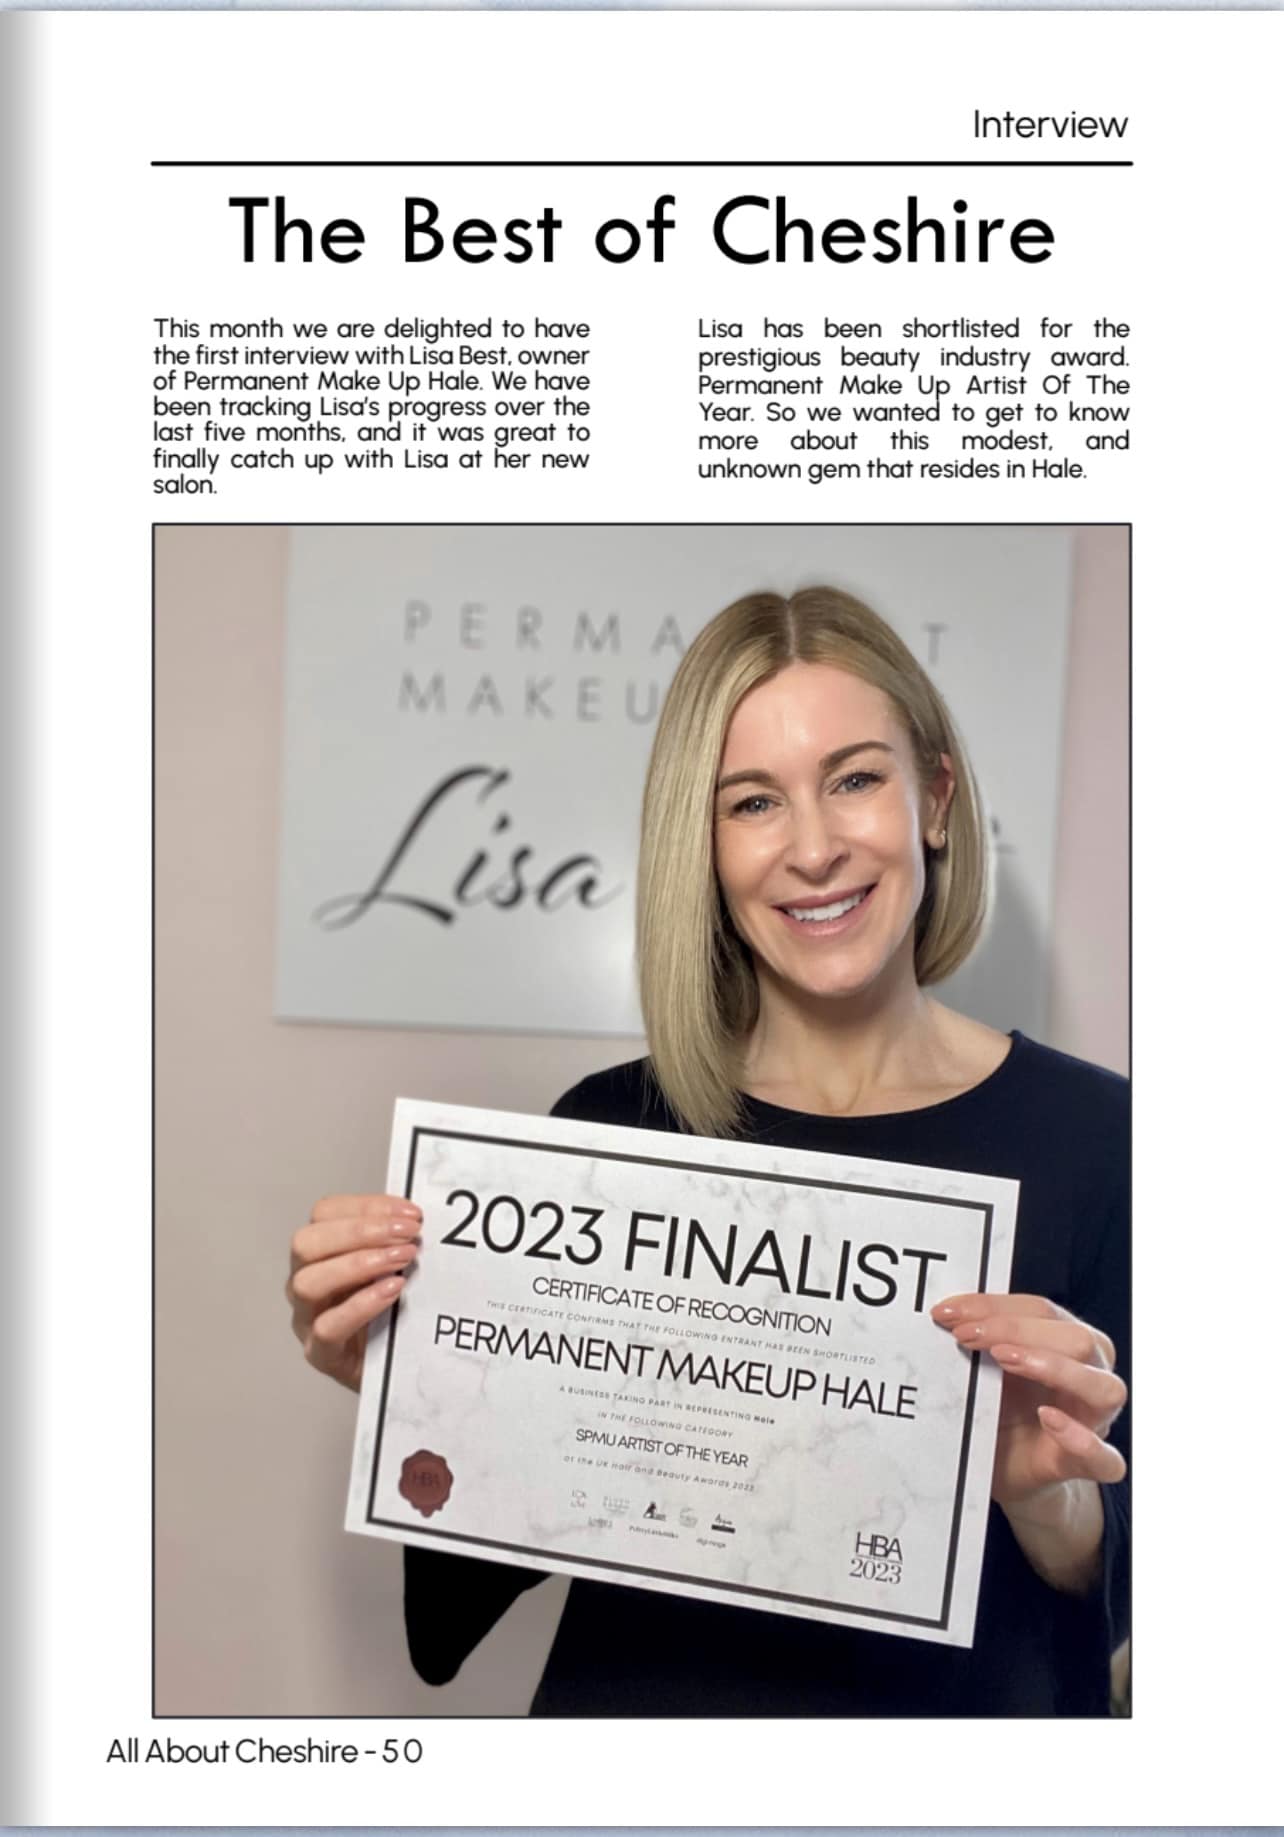 Cheshire Magazine Introduction page with image of Lisa Best with her beauty award certificate